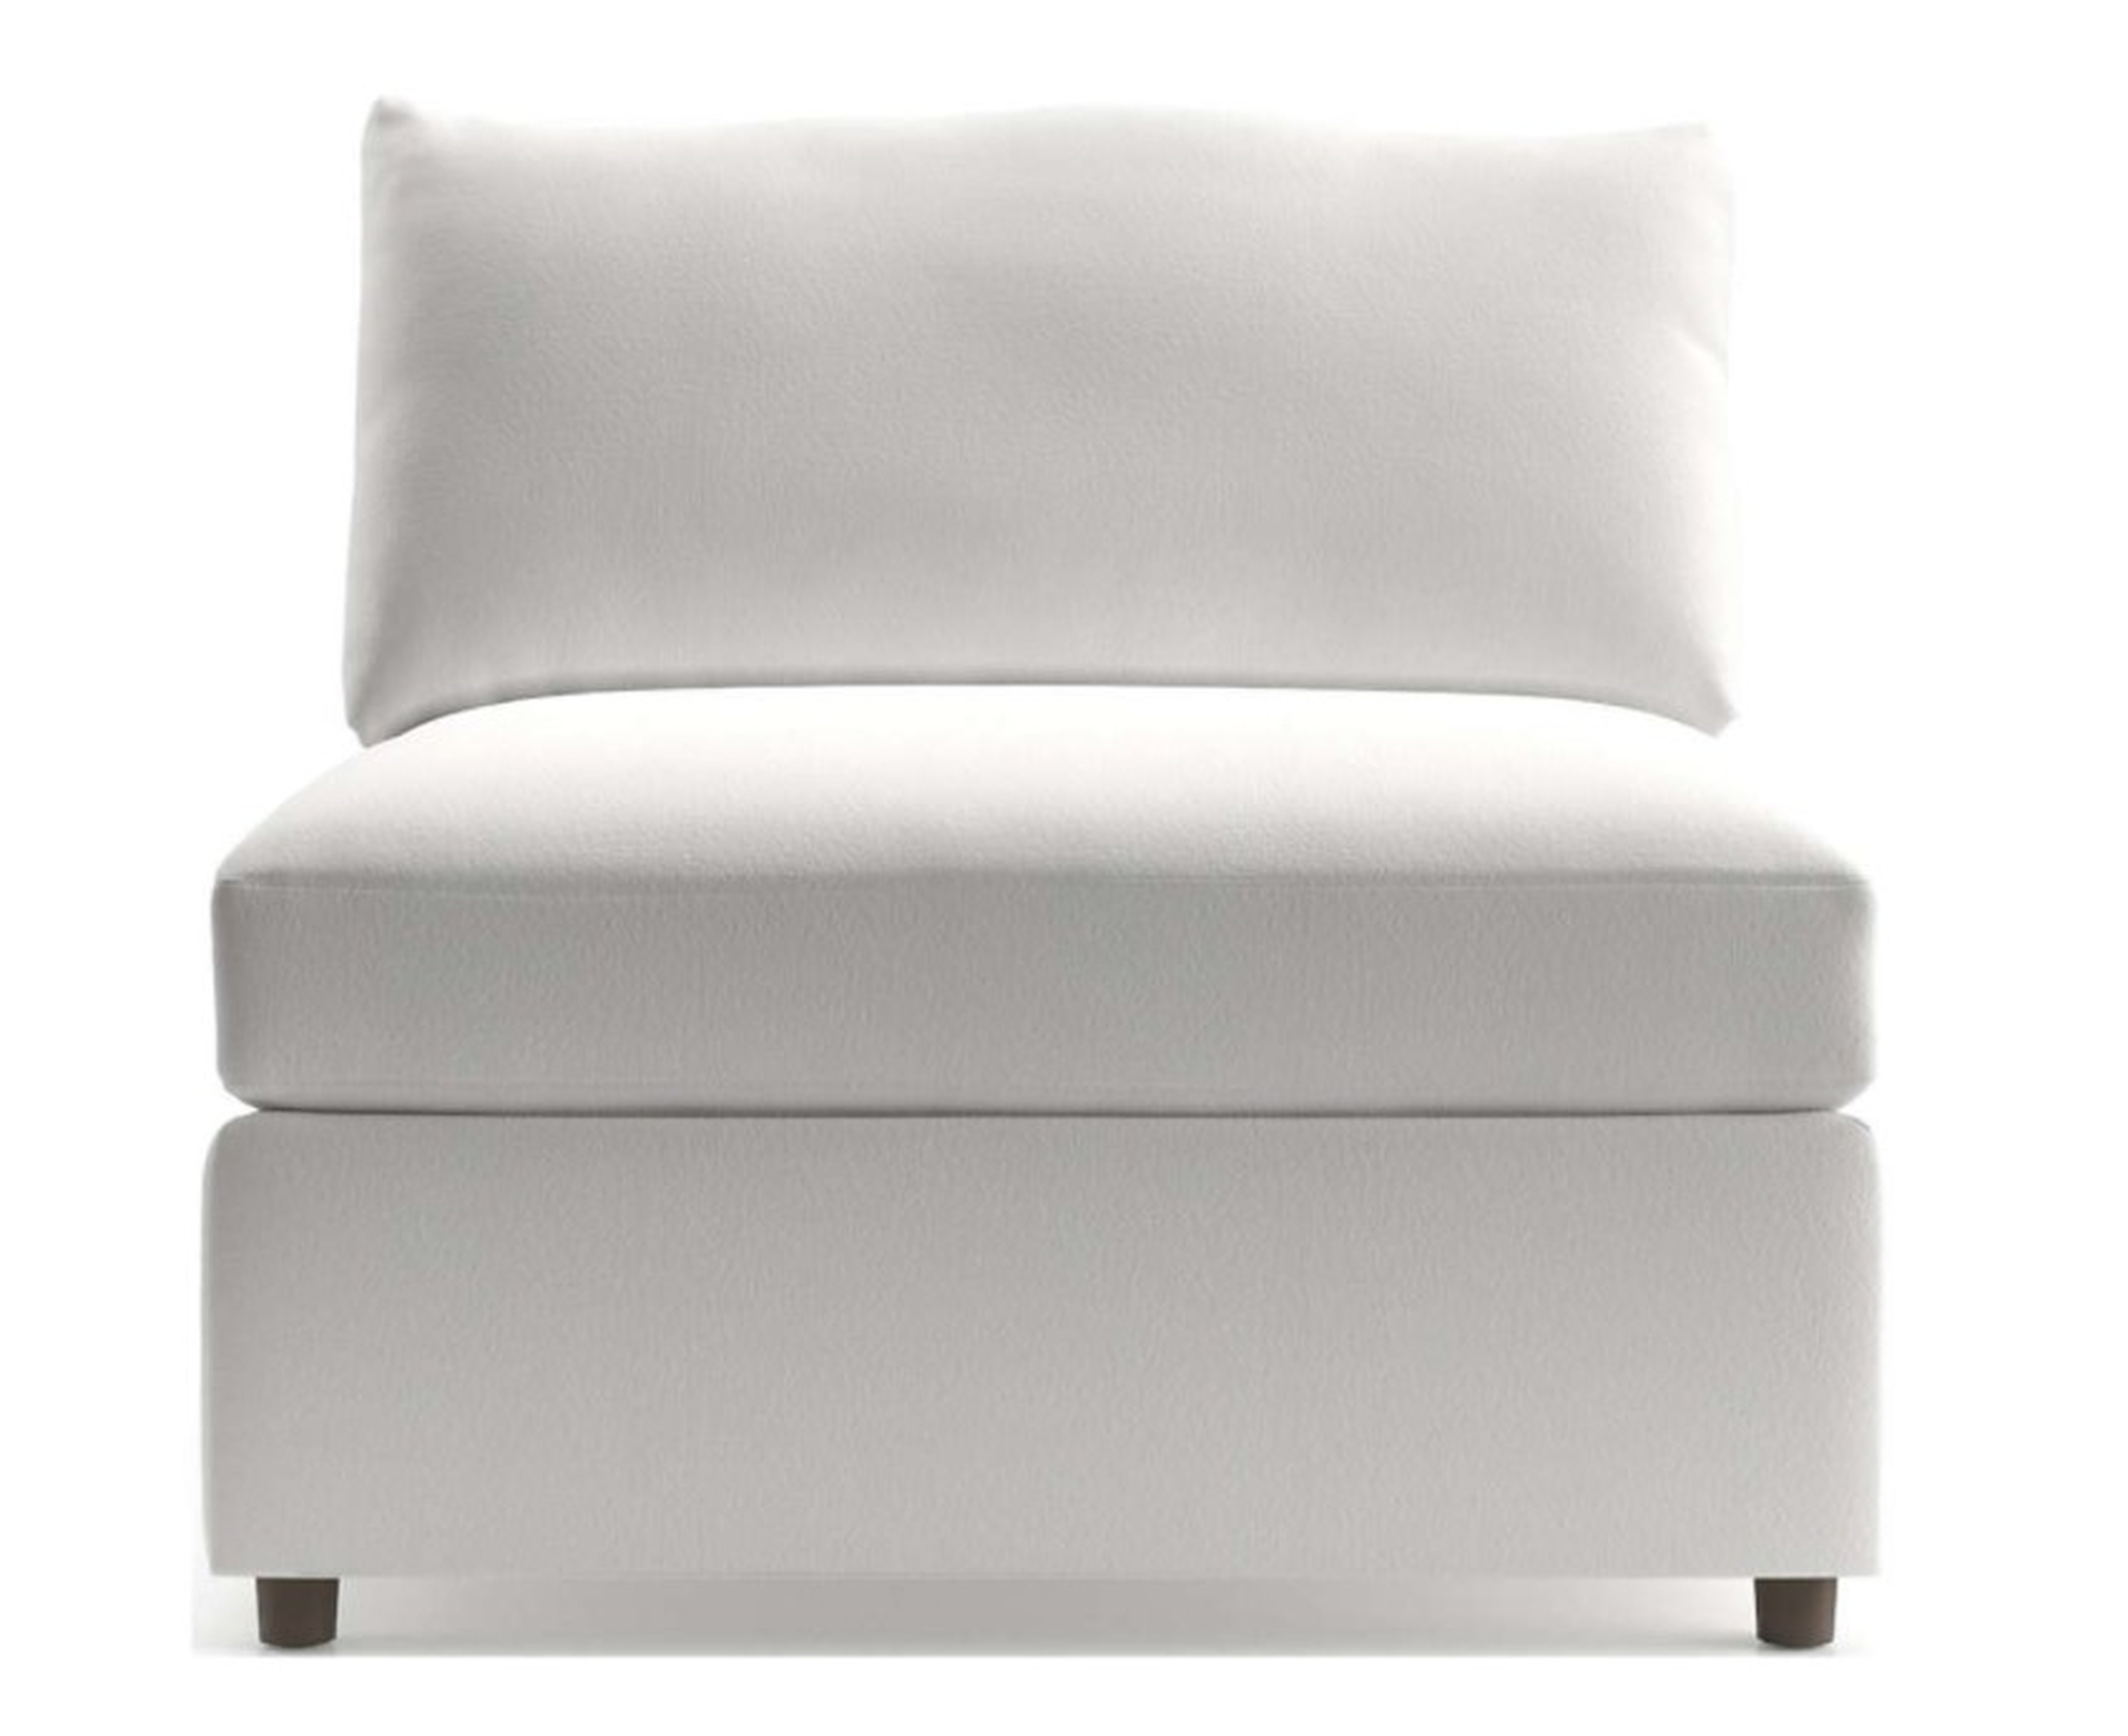 Lounge II Petite 37" Armless Chair- View, White - Crate and Barrel